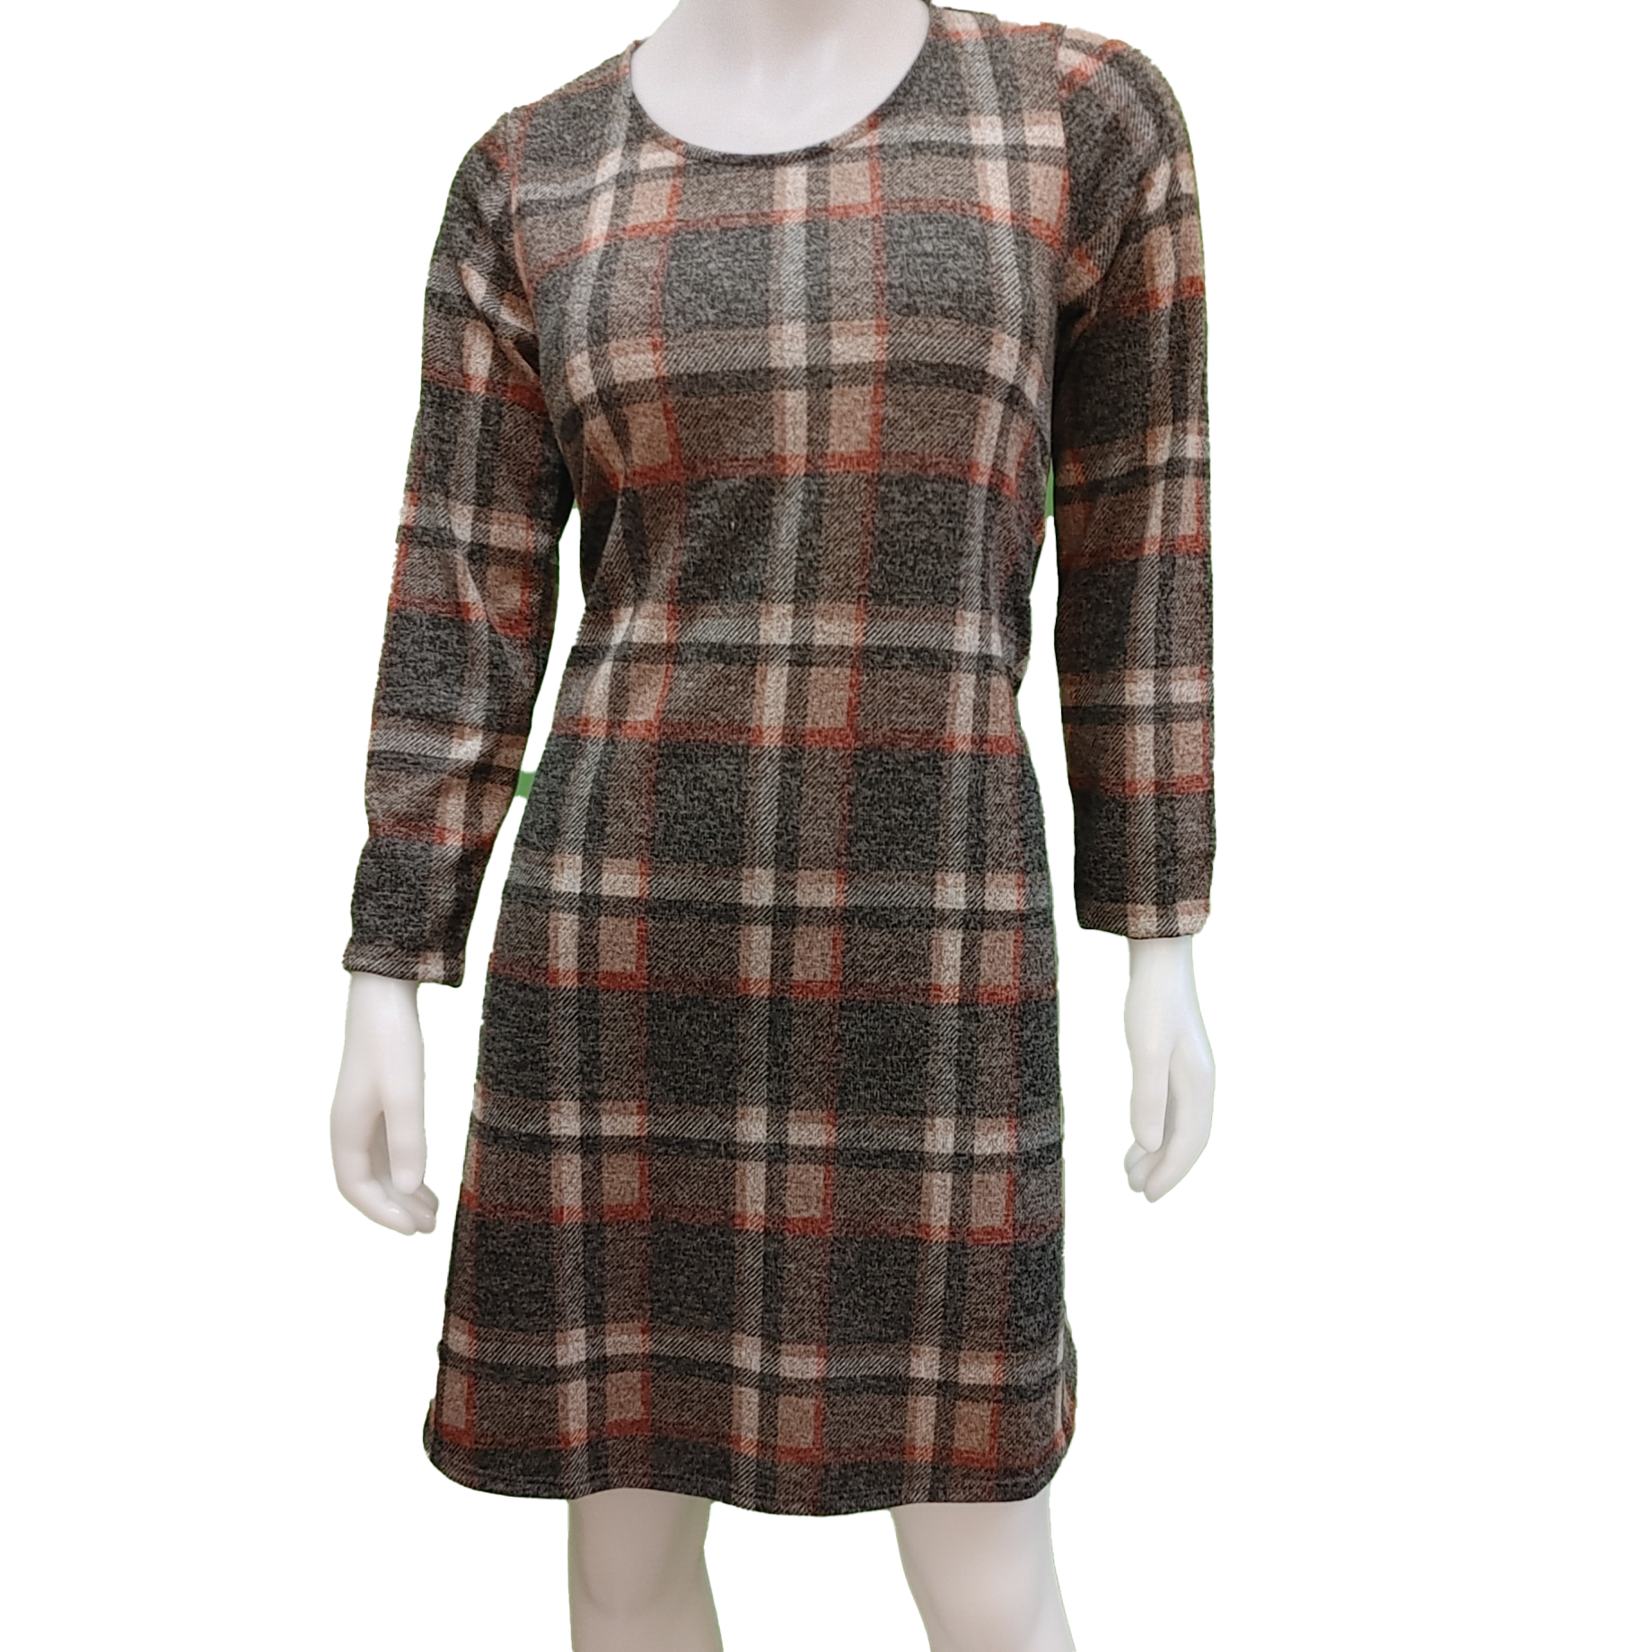 Papillon Papillon brushed plaid A-line sweater dress with pockets, aline